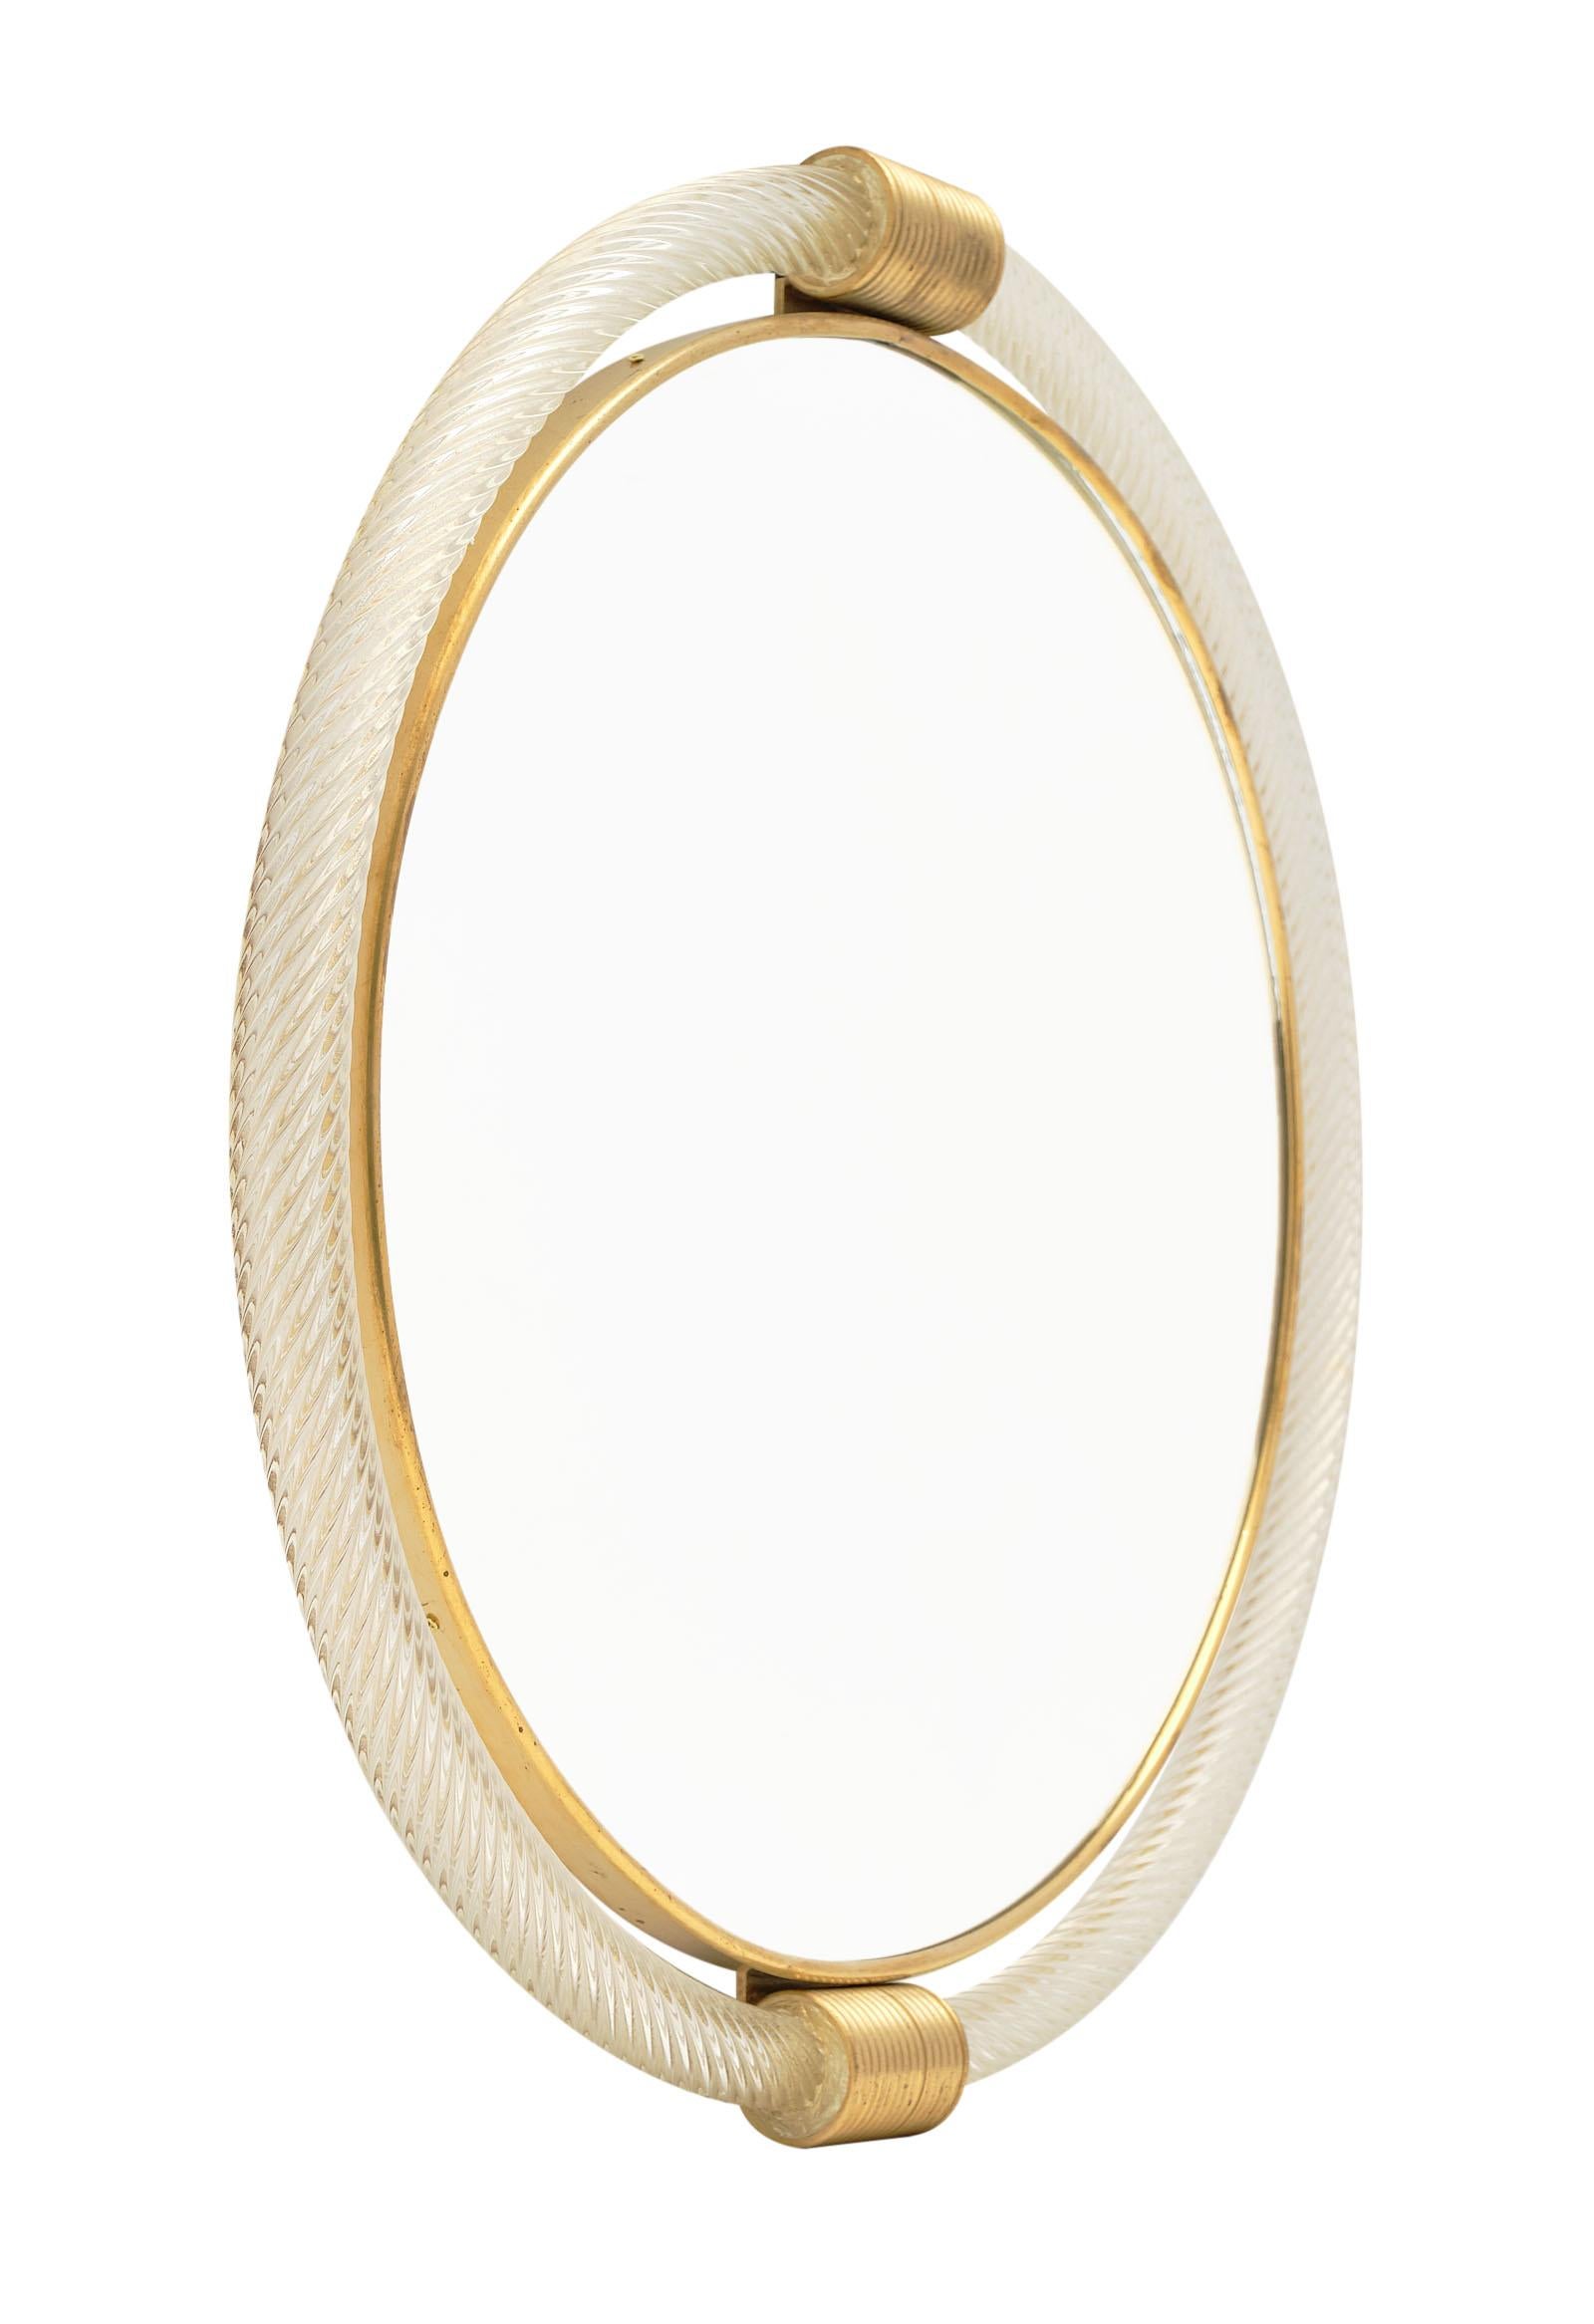 Circular Murano glass “torsado” mirror by Giuliano Fuga. We love the brass framed circular glass mirror surrounded by hand blown “torsado” glass with 23-carat gold fused within. A striking mirror!